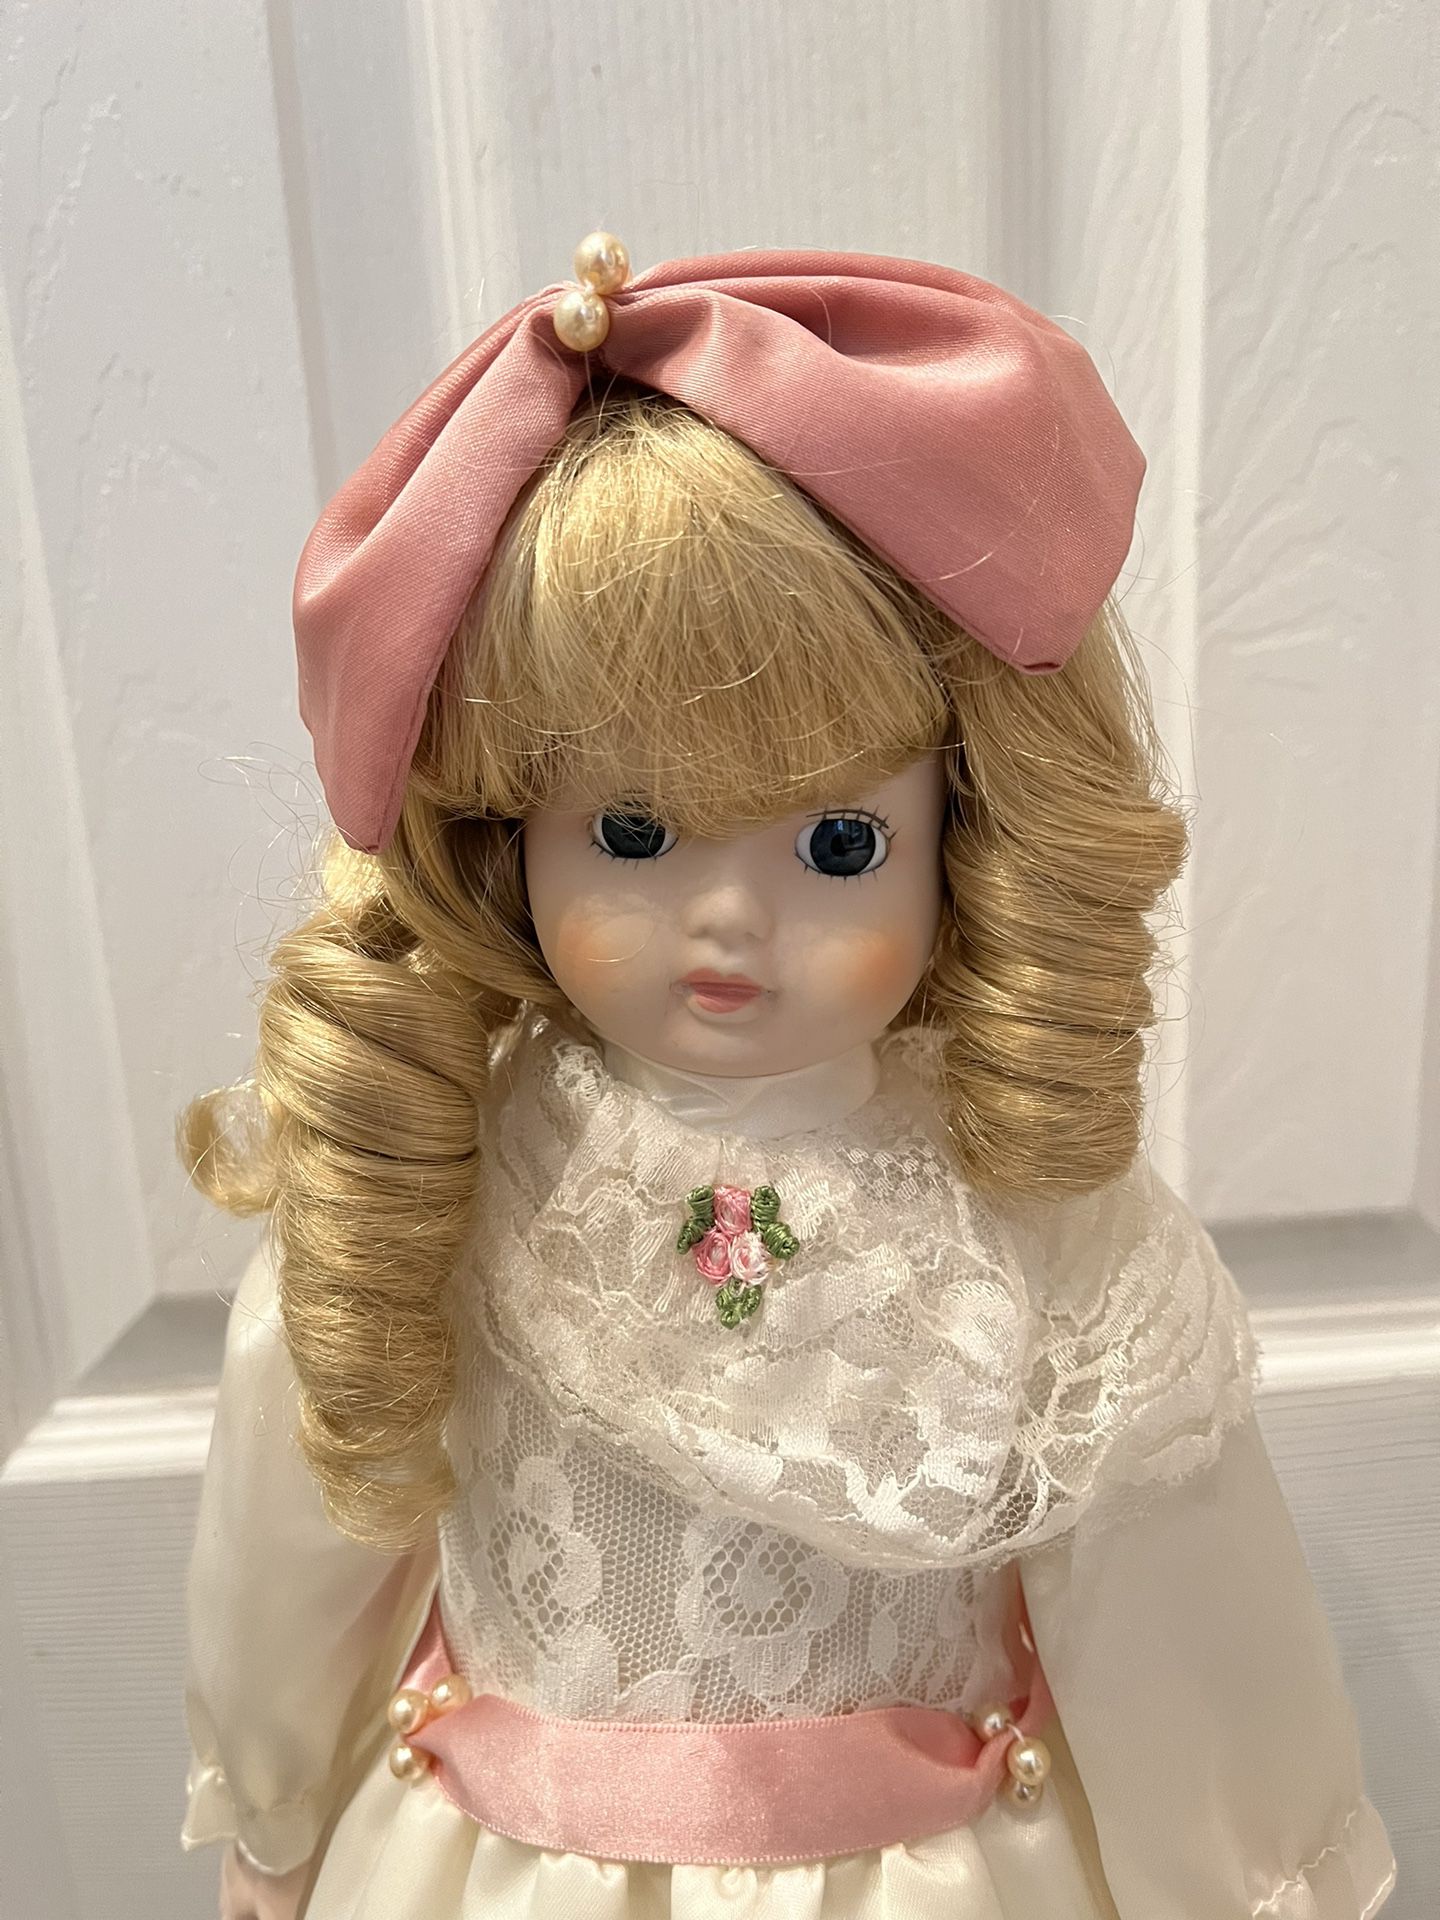 Porcelain Doll With Satin Dress, Pink Bowes , Ribbon And Lace And White Pearls.  Blond Ringlets, White Petticoat And White Laced Shoes. 